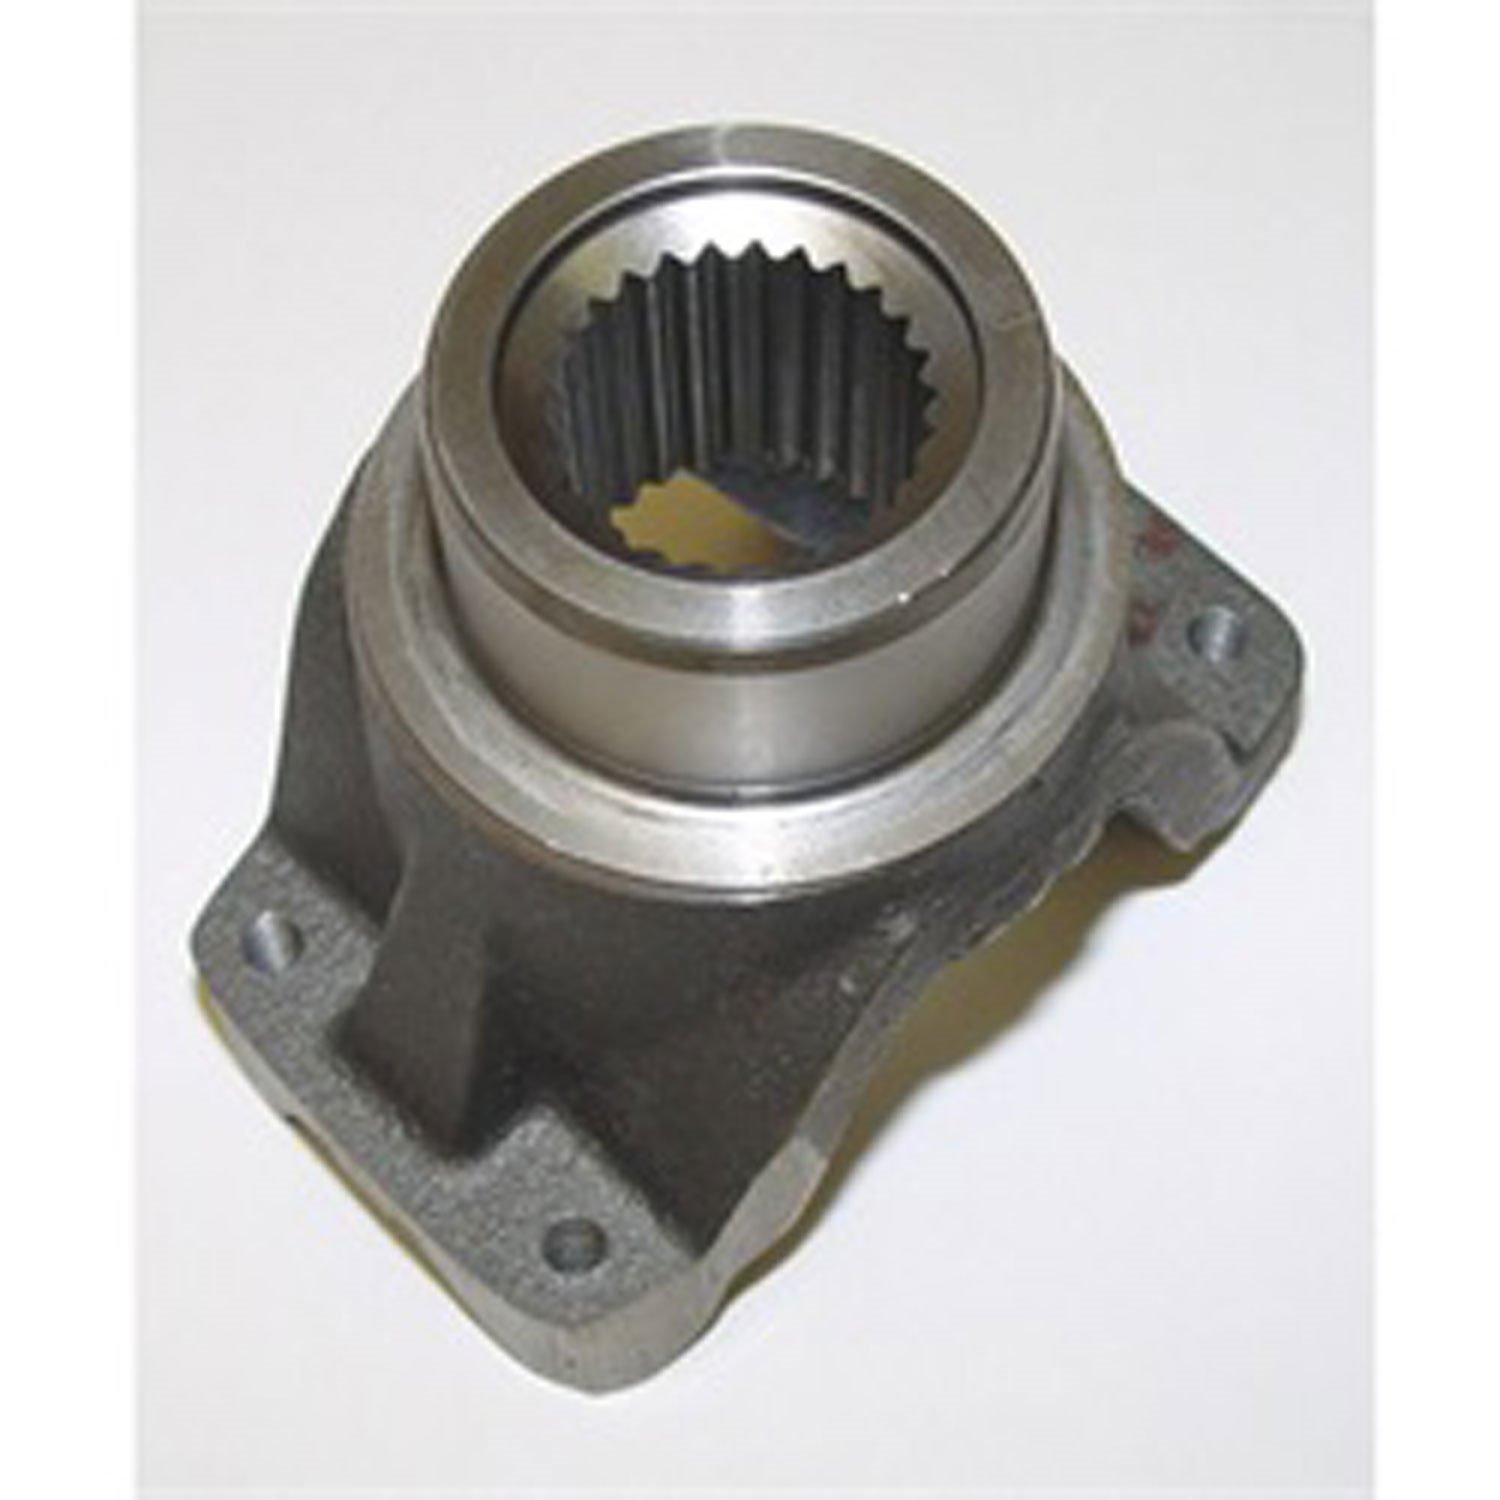 This Dana 35 pinion yoke from Omix-ADA accepts U-joint straps. Fits 96-01 Jeep Cherokees and 93-95 Wranglers.